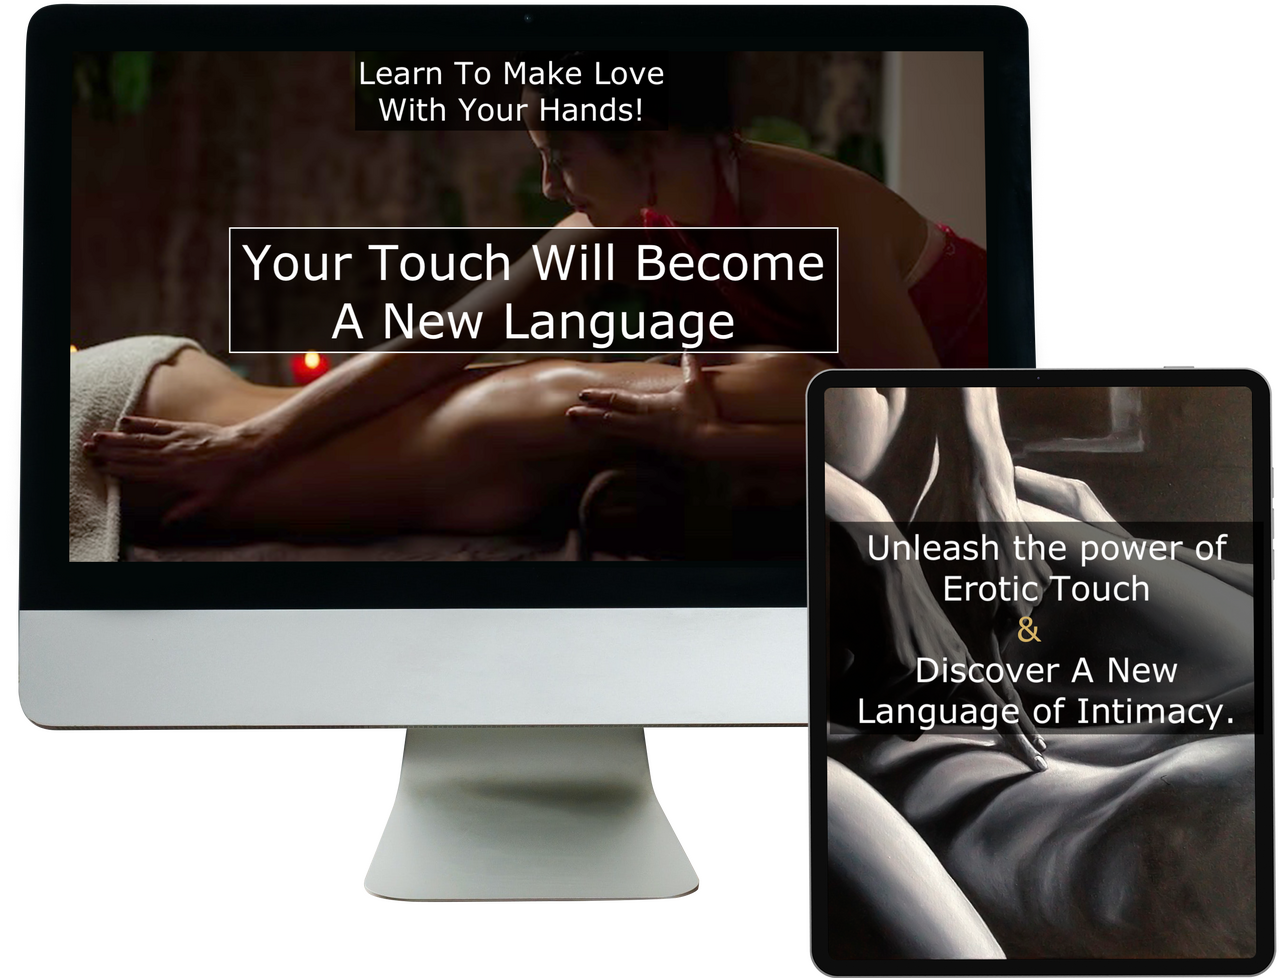 Erotic Touch Course-ConfidentLovers.com